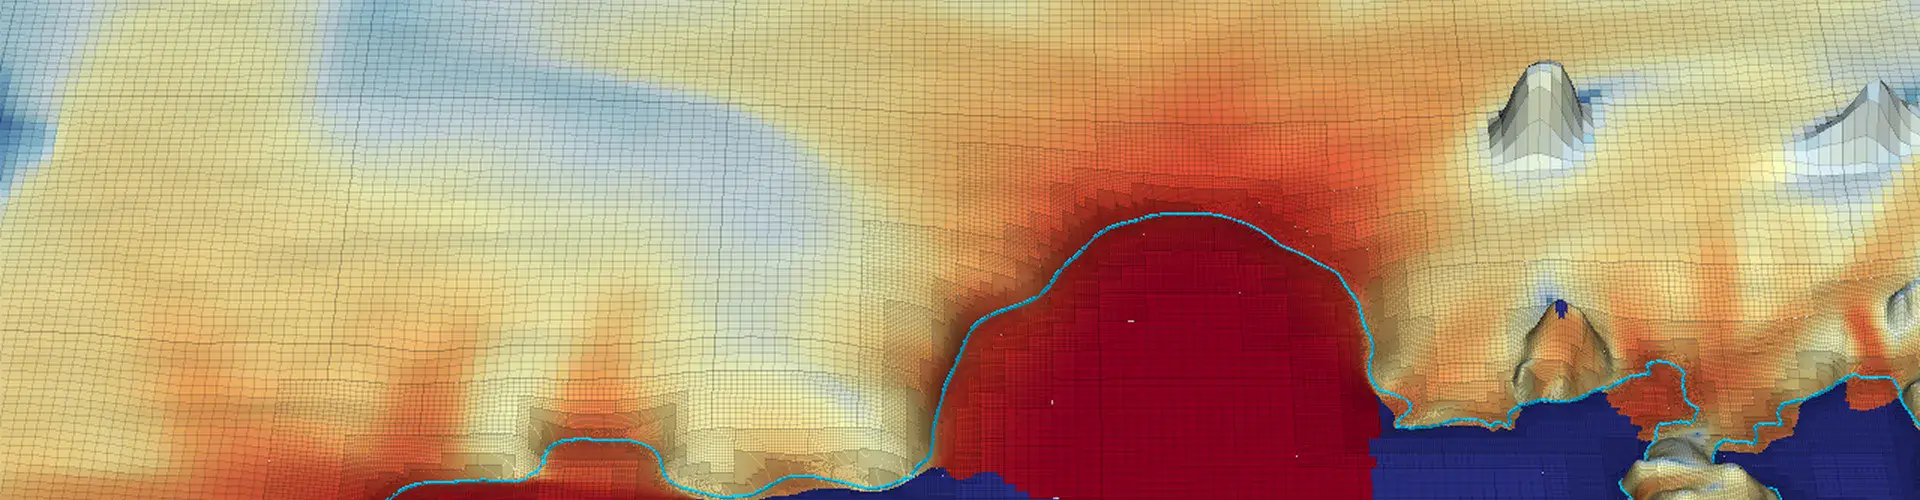 The retreat in West Antarctica’s Amundsen Sea Embayment in 2154, according to the computer model. Red represents very fast ice loss. (Credit: Cornford et al., The Cryosphere, 2015)